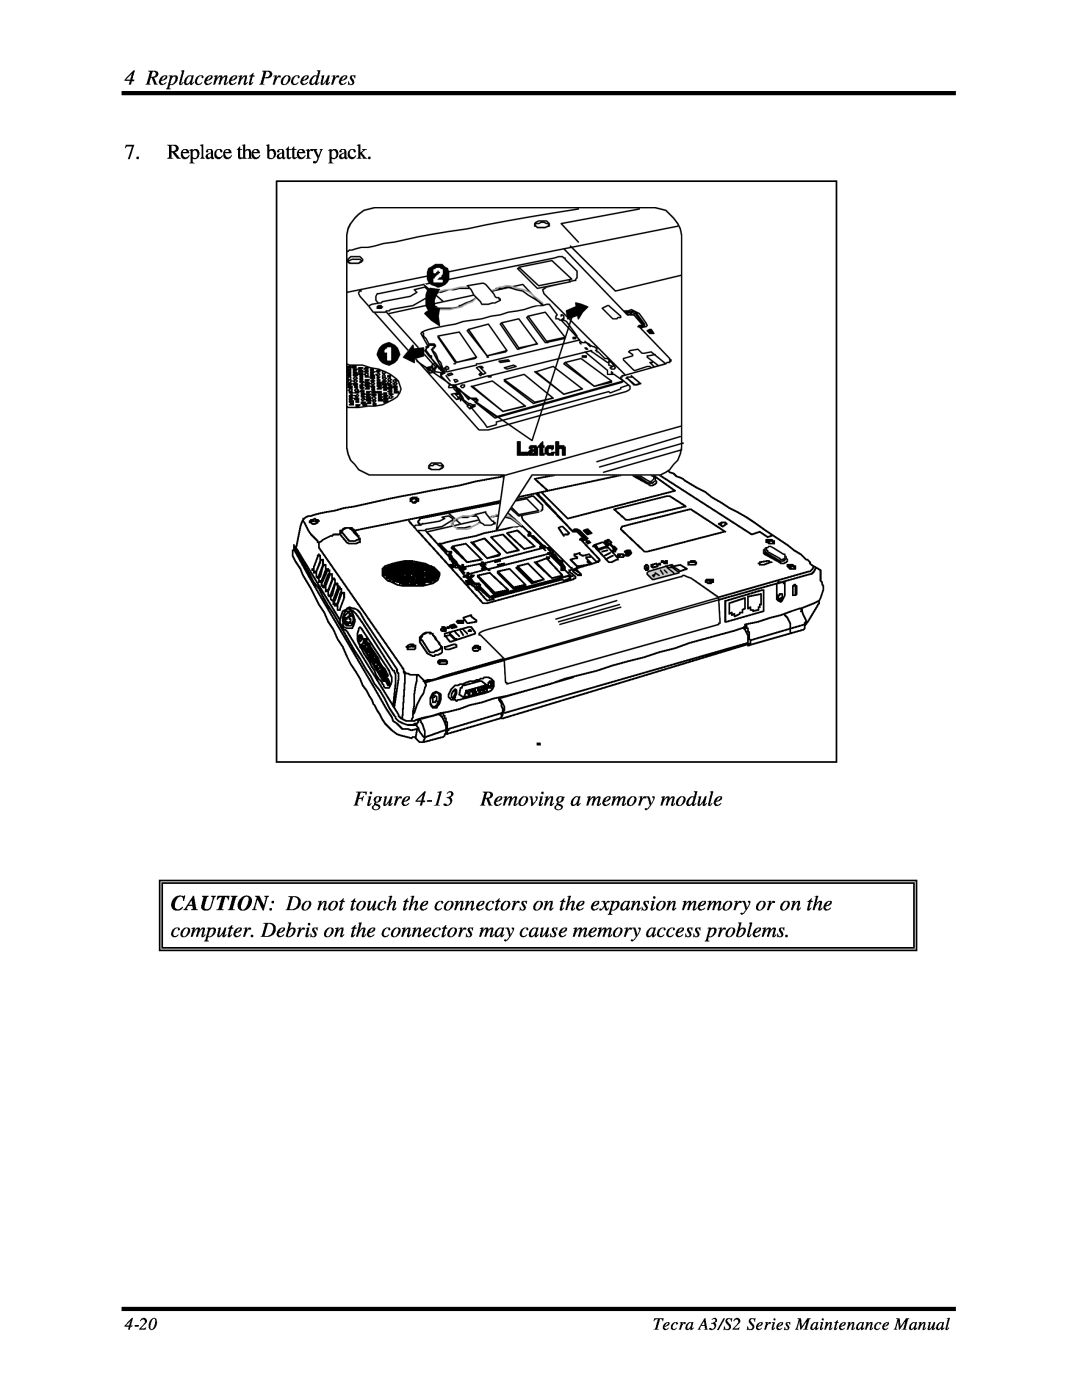 Toshiba S2 manual 13 Removing a memory module, Replacement Procedures, Replace the battery pack, 4-20 